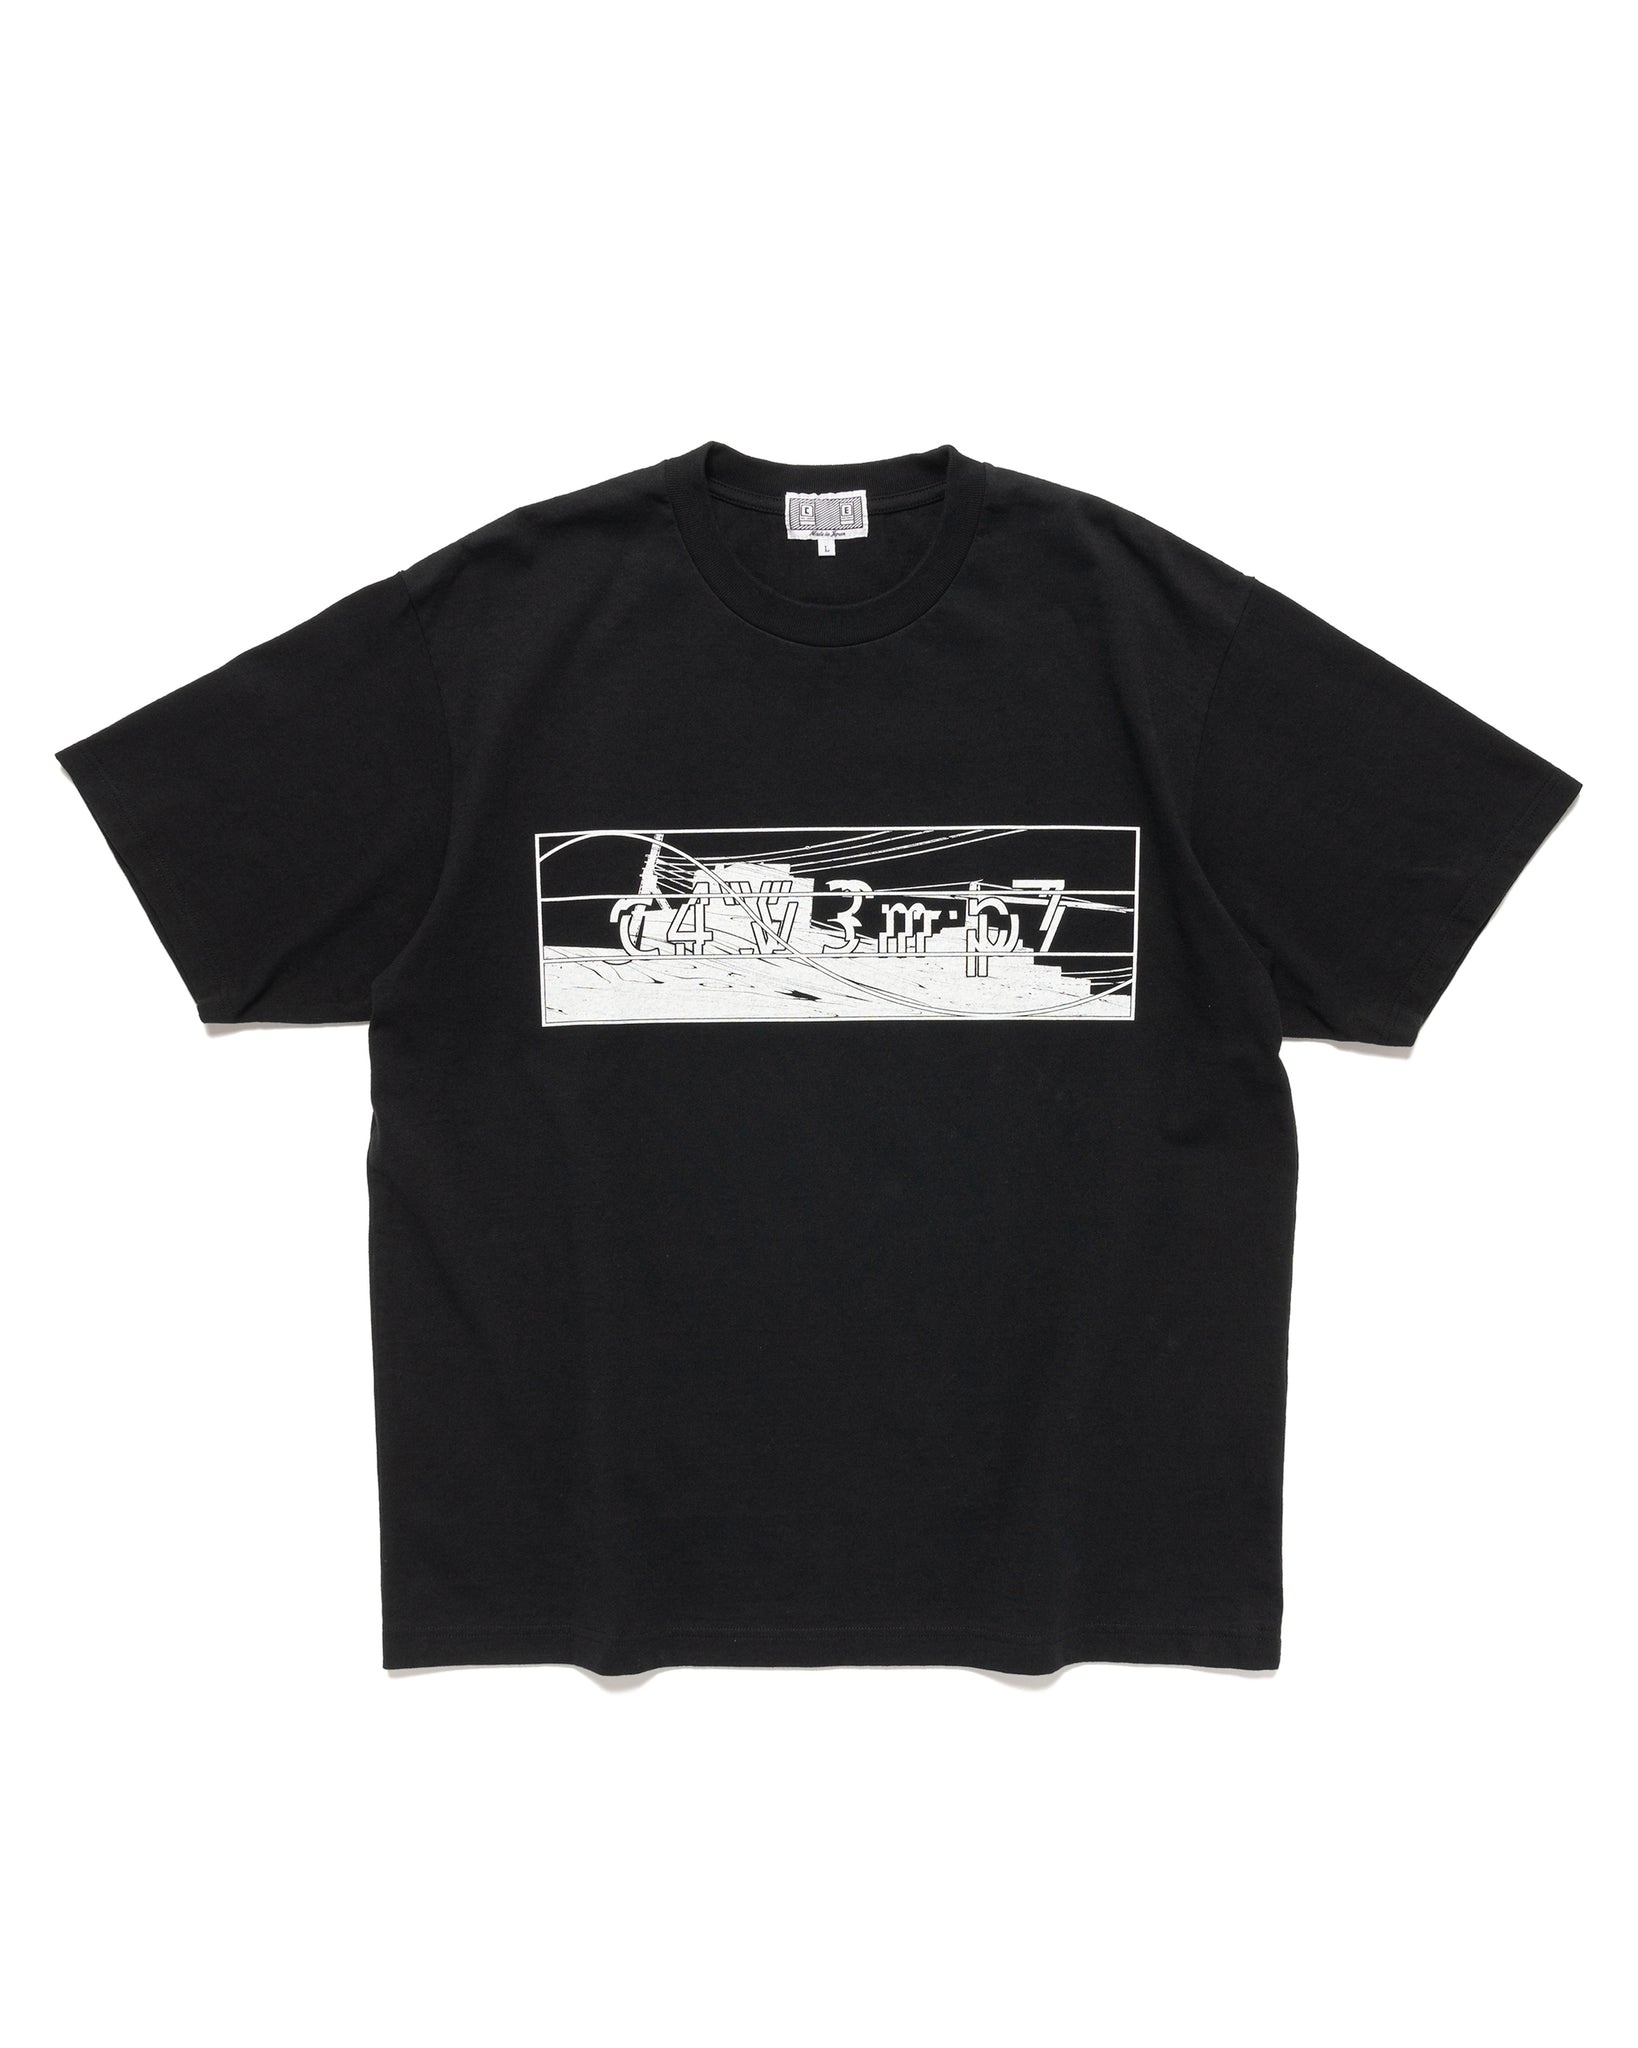 MARKS OF THE END T-SHIRT BLACK - 2